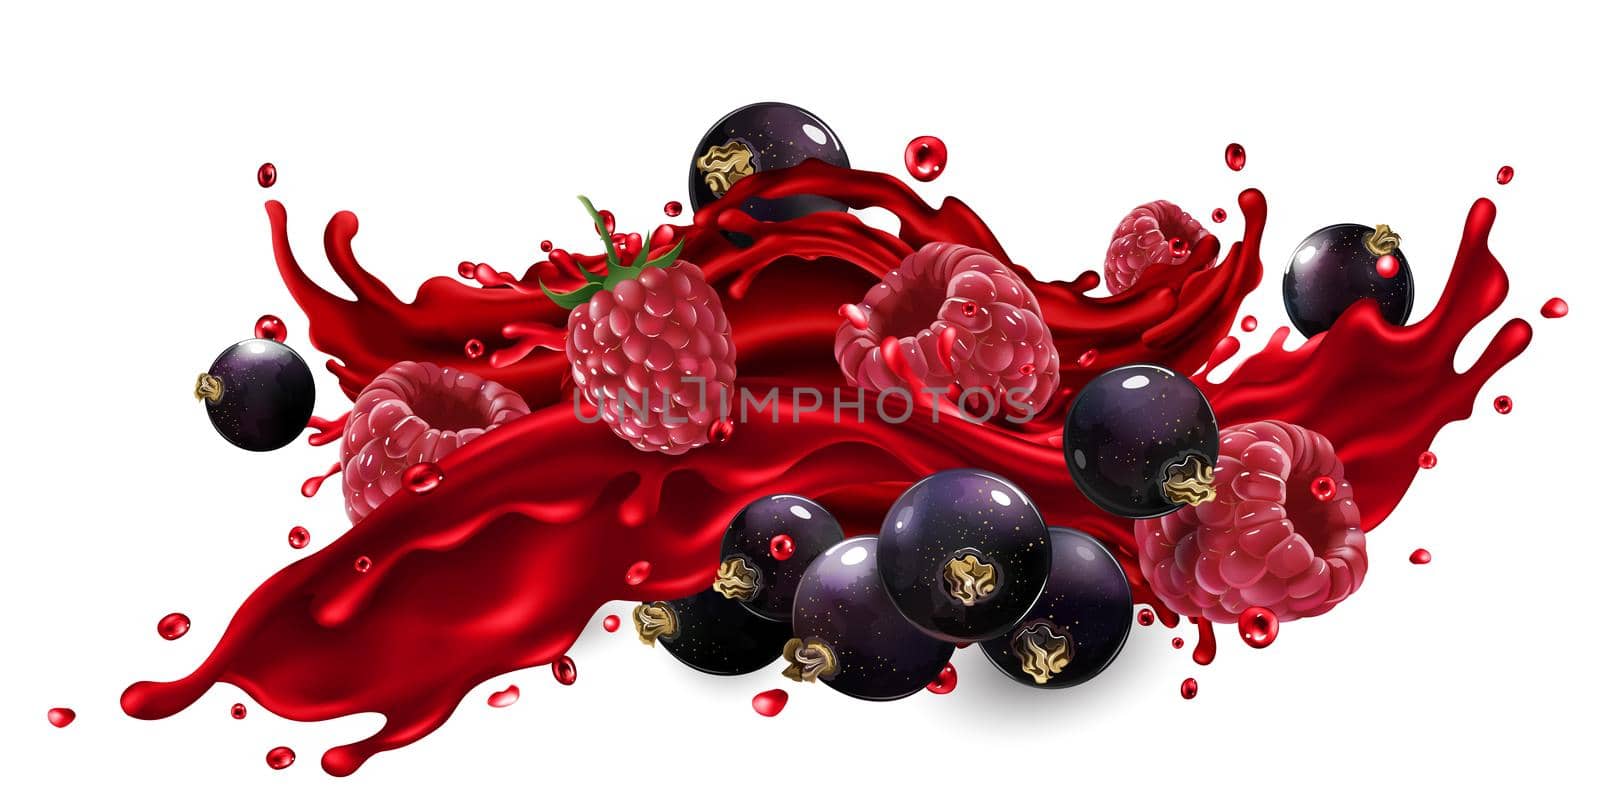 Fresh black currant and raspberry in a splash of fruit juice on a white background. Realistic style illustration.